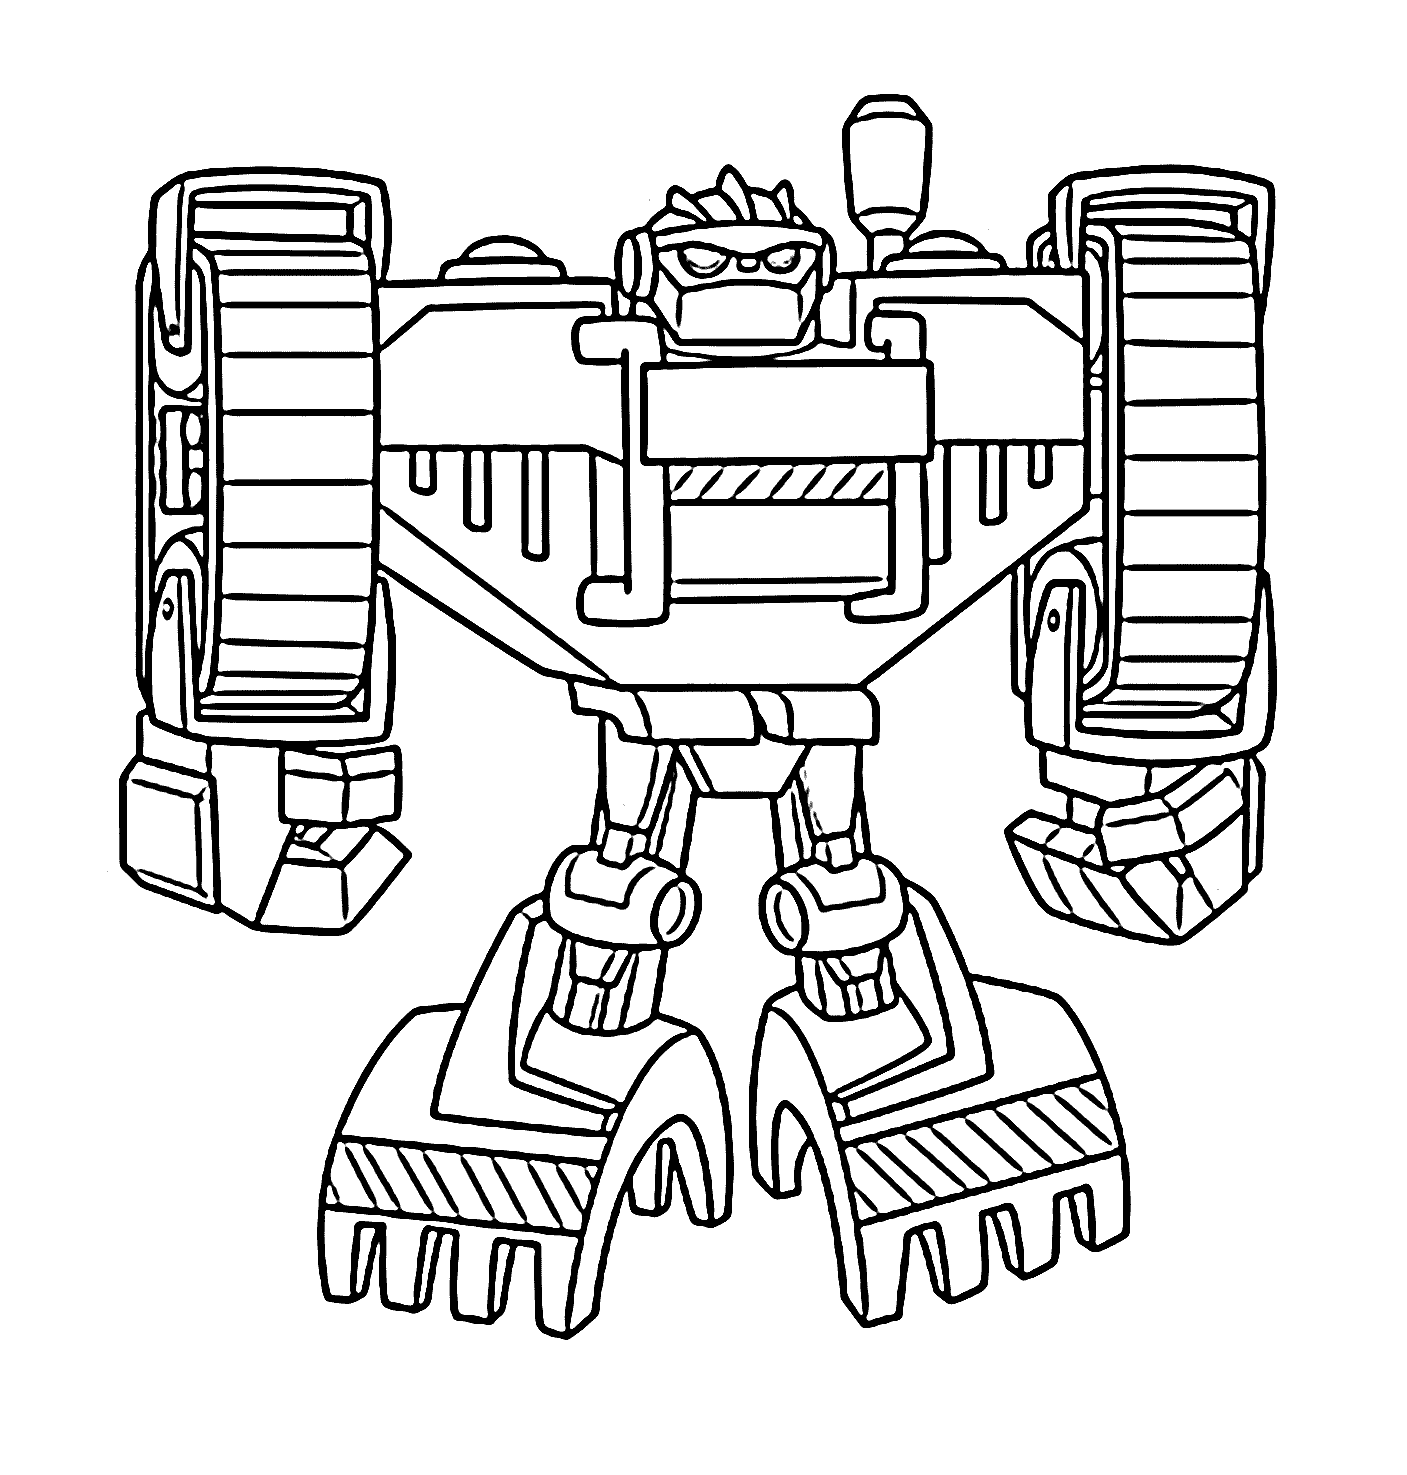 Rescue Bots Coloring Pages - Best Coloring Pages For Kids